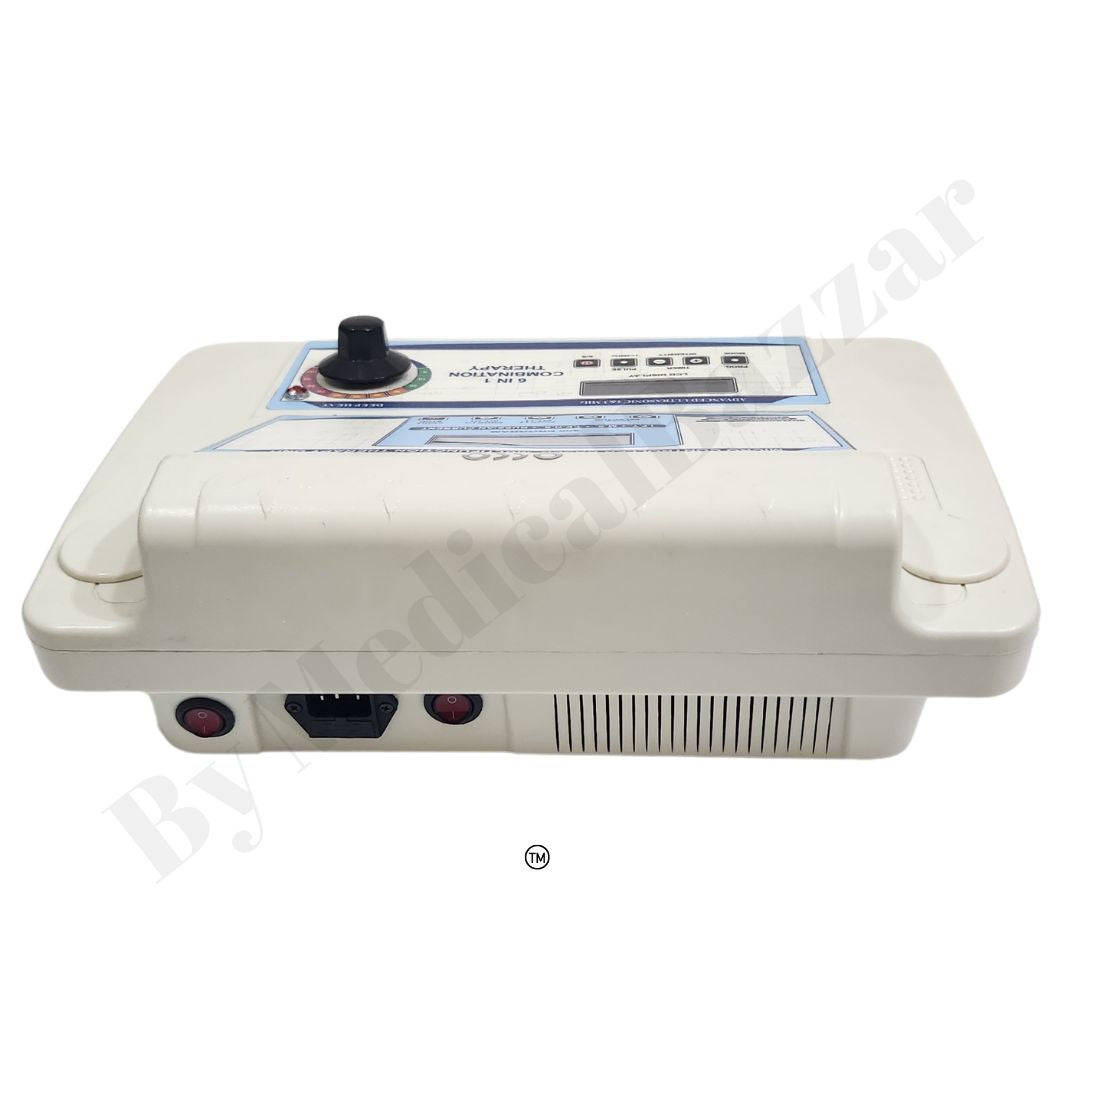 acco 6 in 1 Combo (IFT+MS+TENS+Russian+US 1&3Mhz) with Deep Heat Therapy Unit